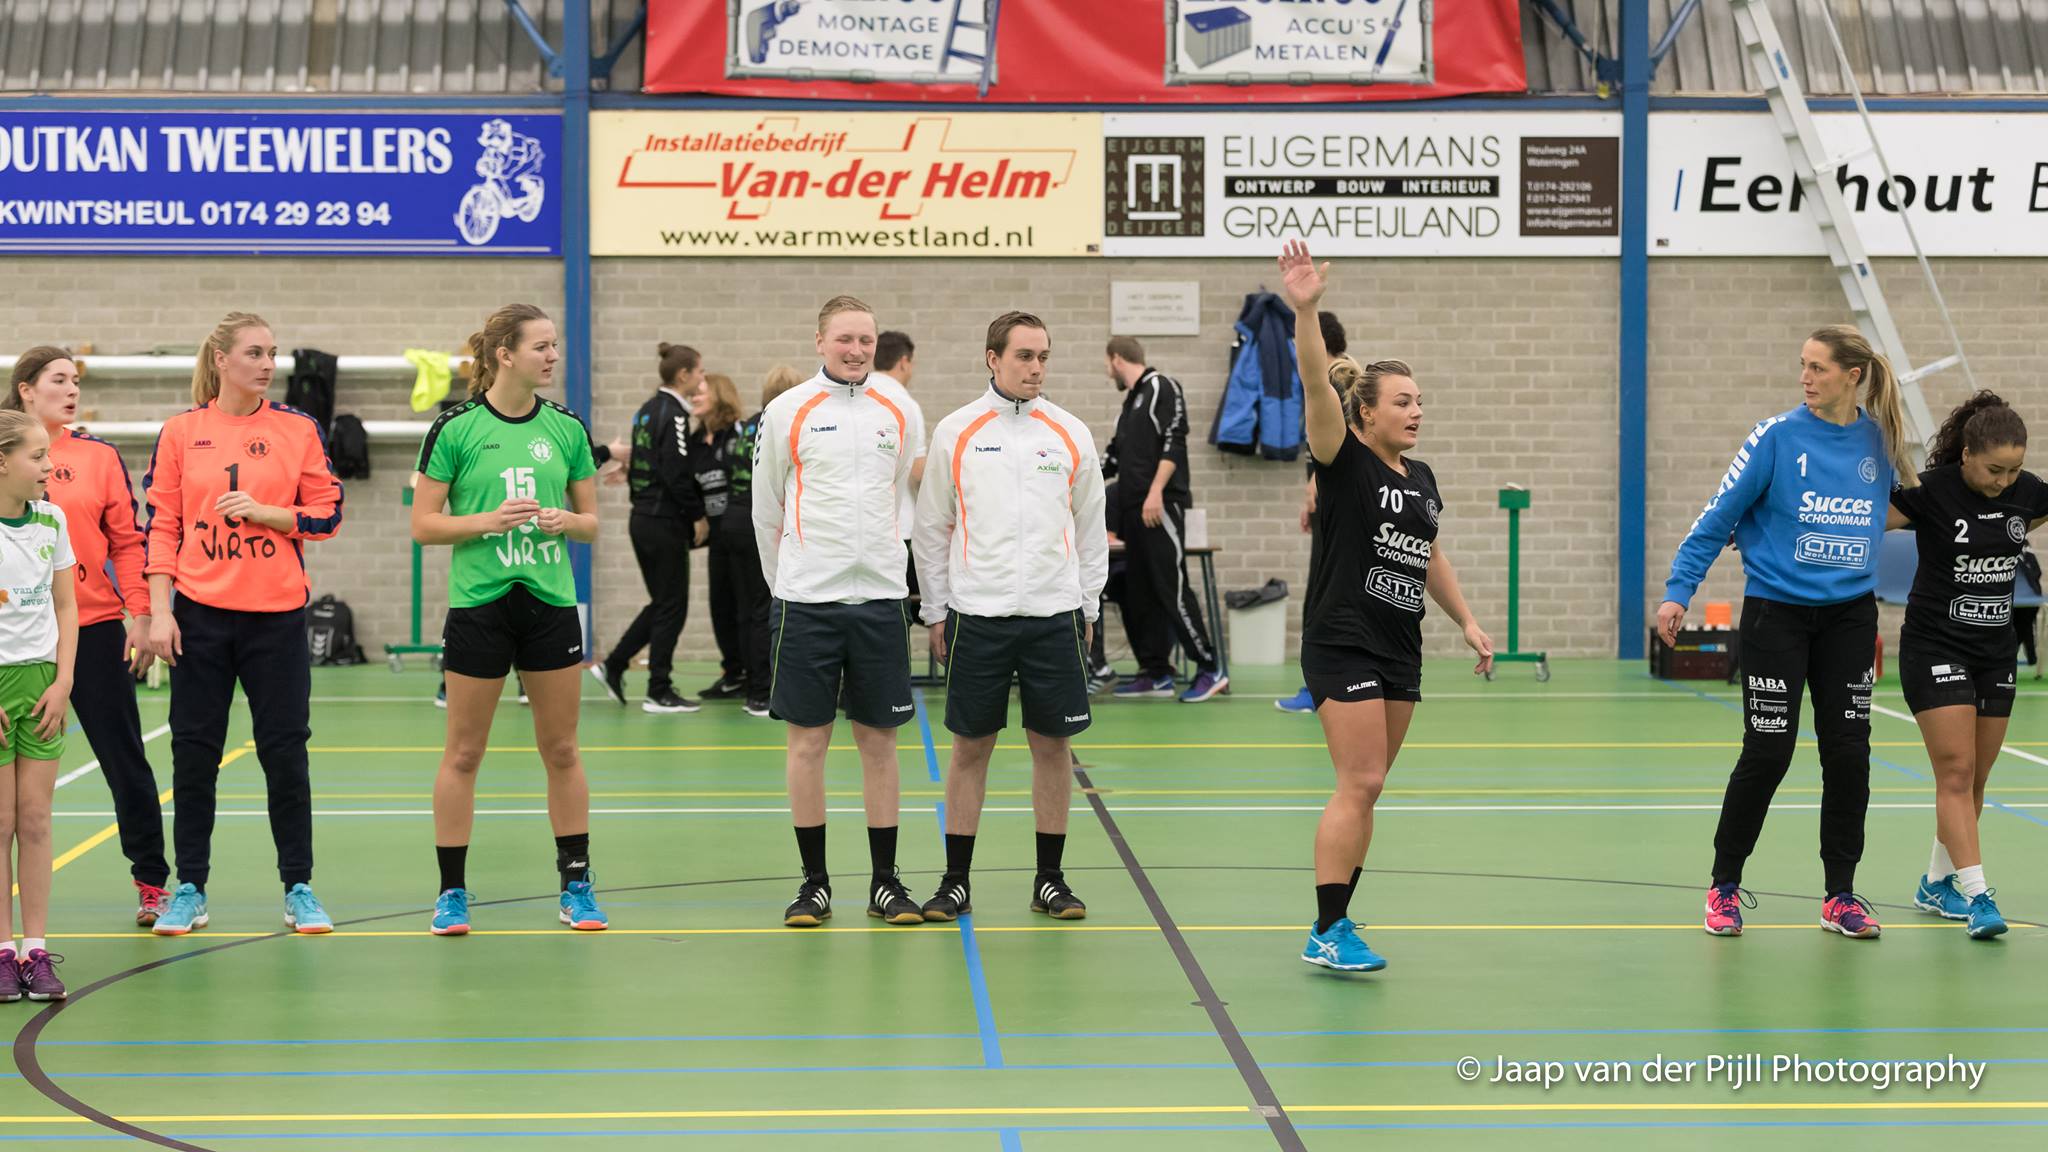 5-tips-for-effective-communication-with-a-communication-system-from-Handball-referee-Koen-Stobbe